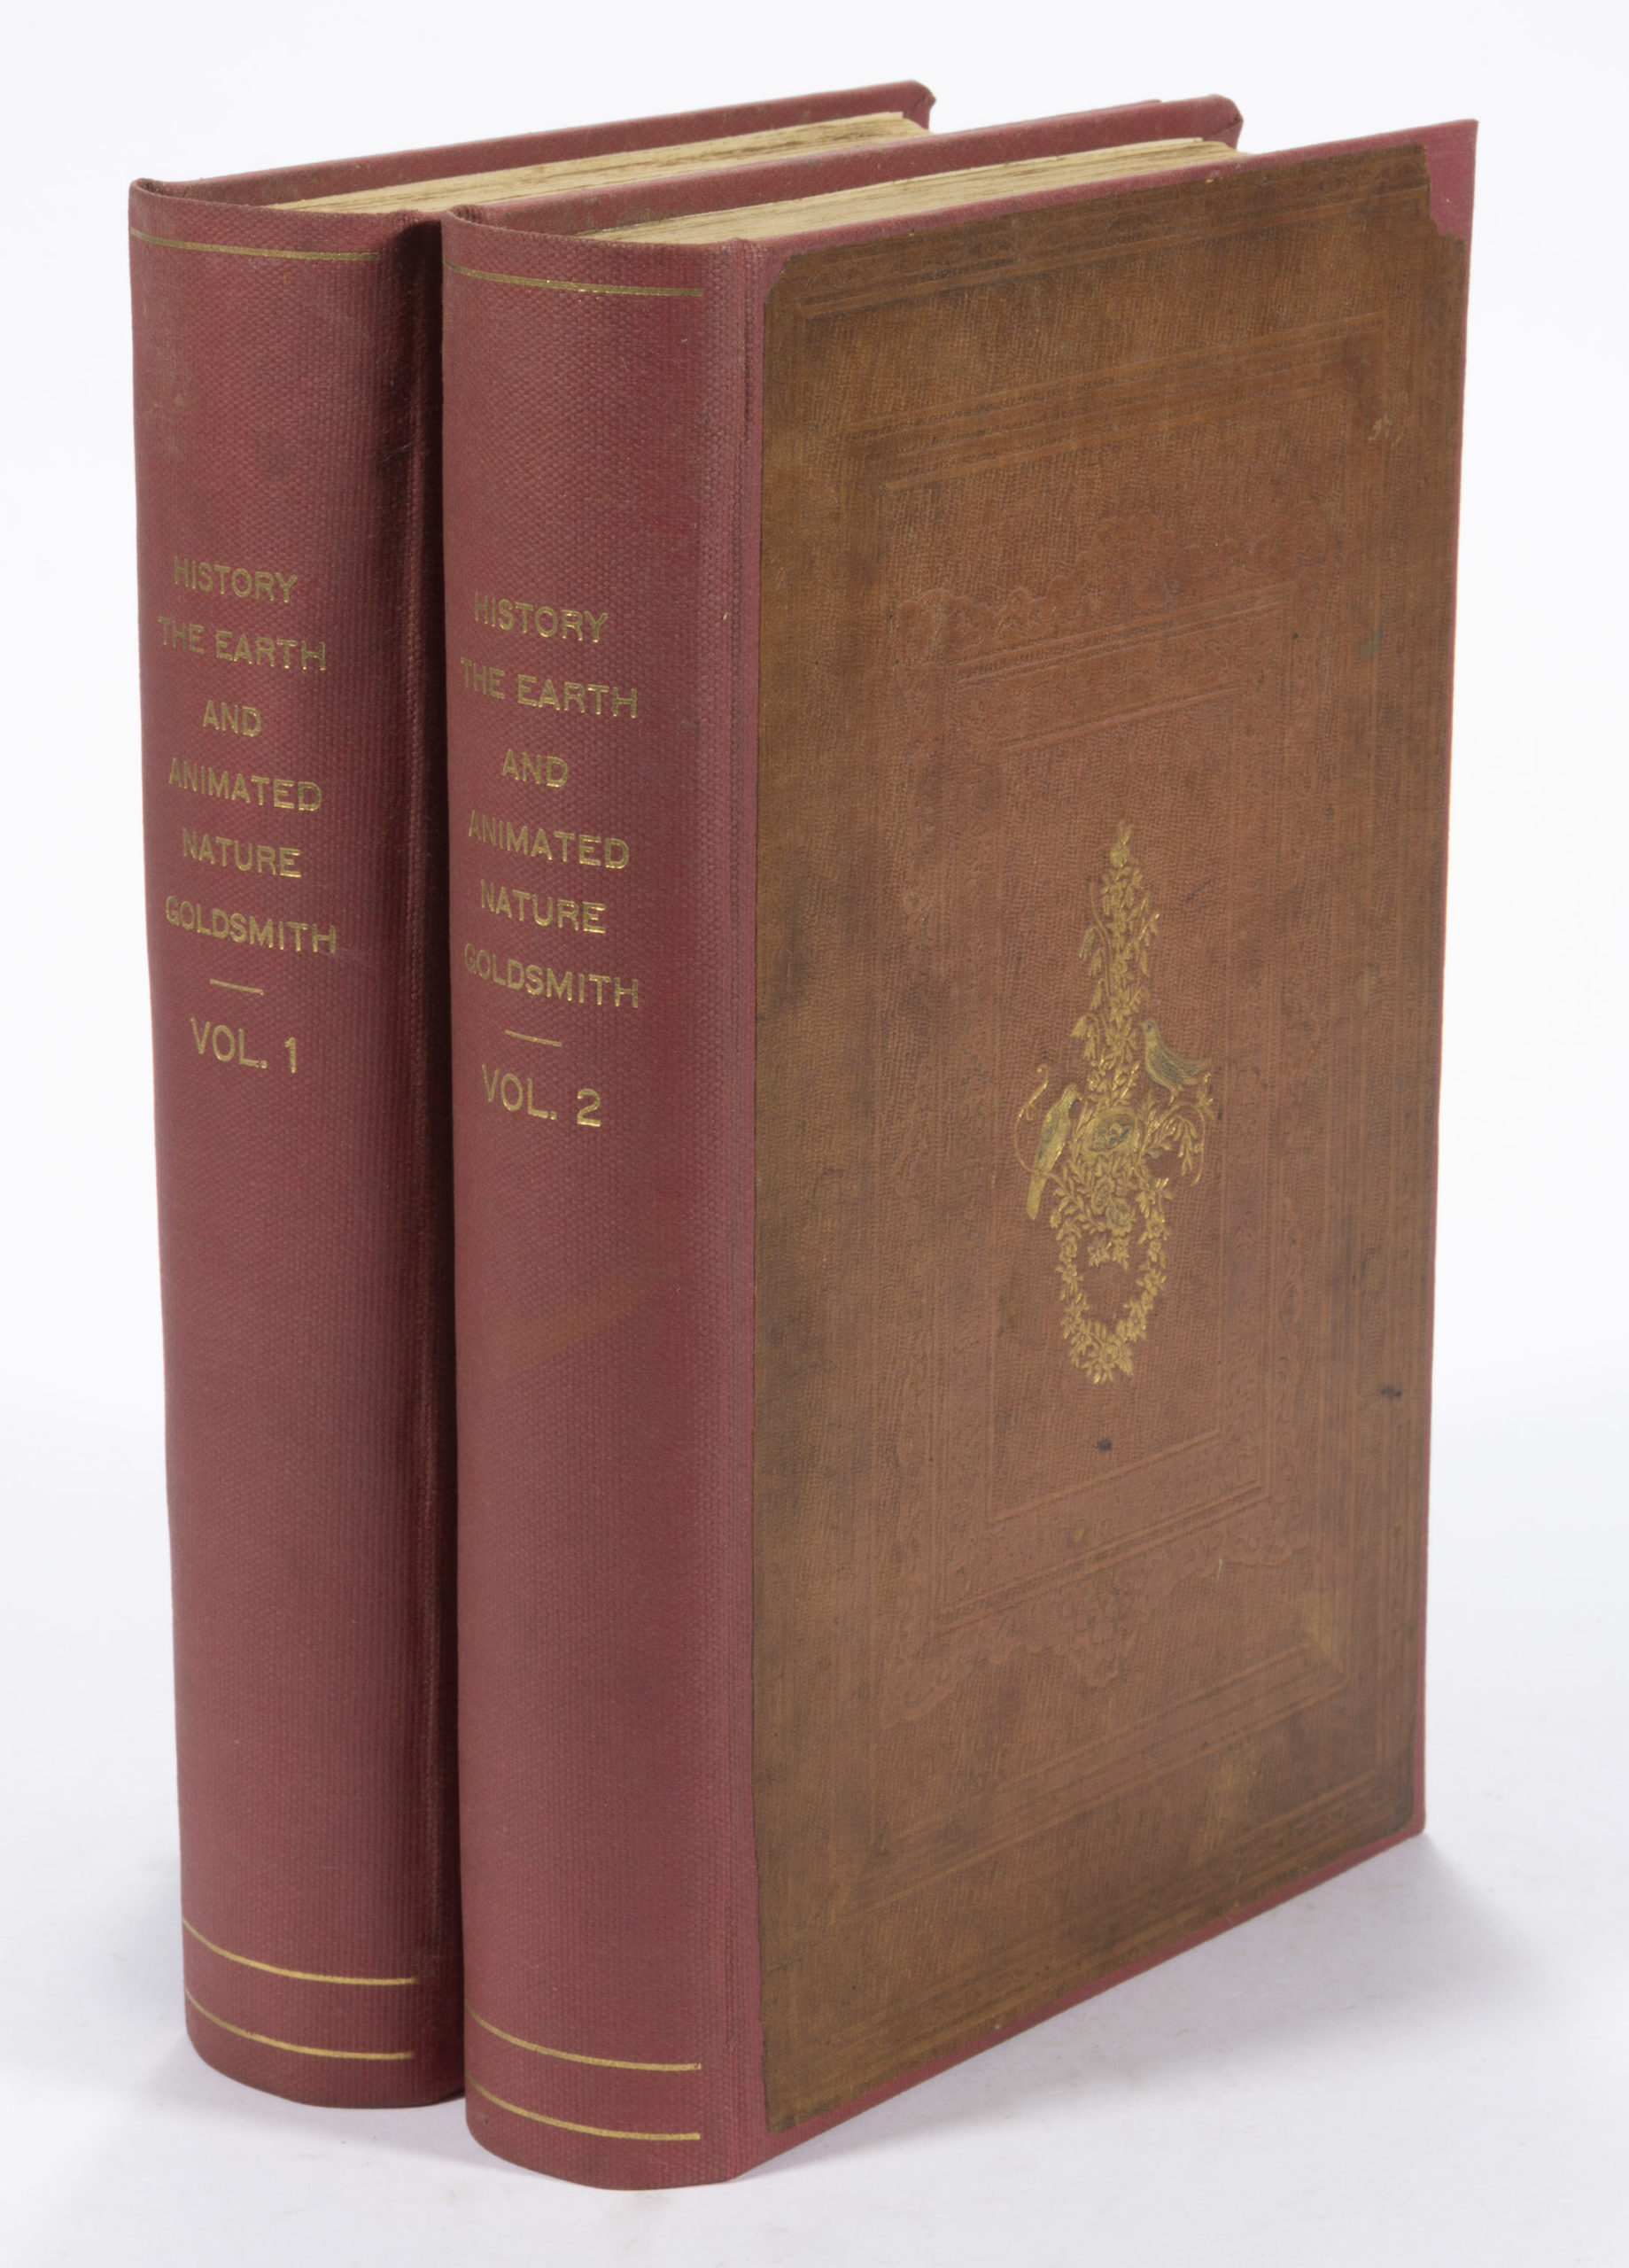 ANTIQUARIAN NATURAL HISTORY COLOR-PLATE TWO-VOLUME SET,